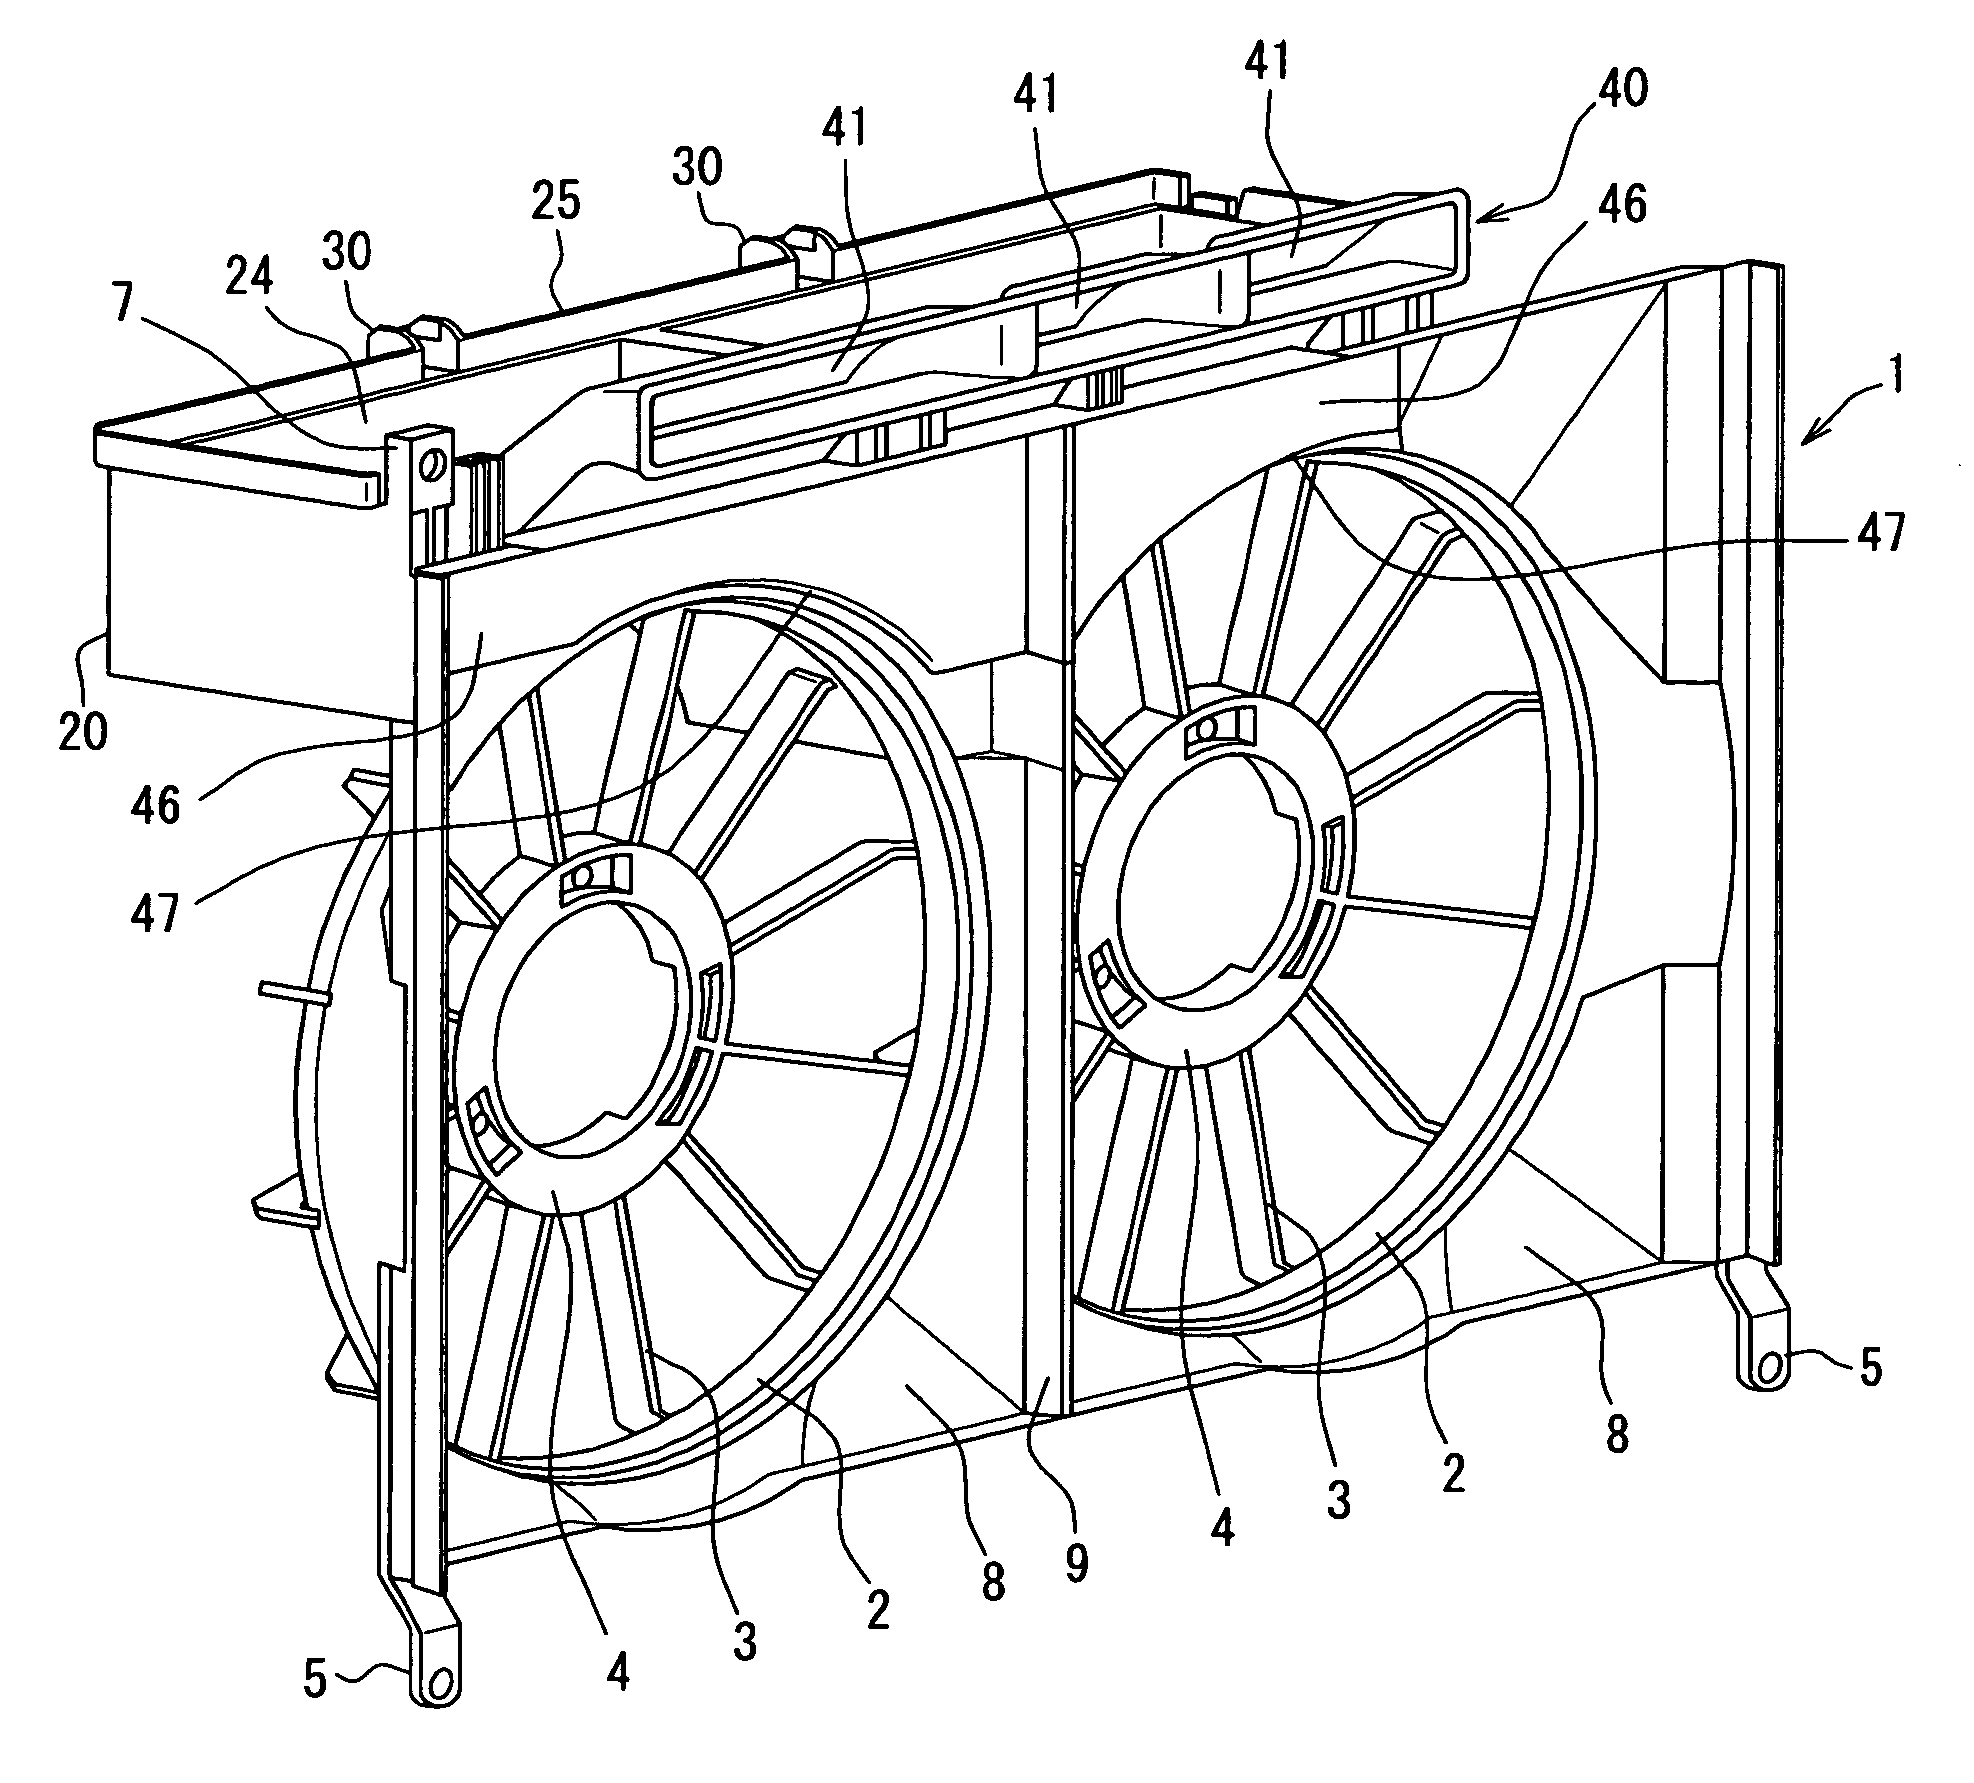 Air cleaner unit for vehicle and fan shroud having the same